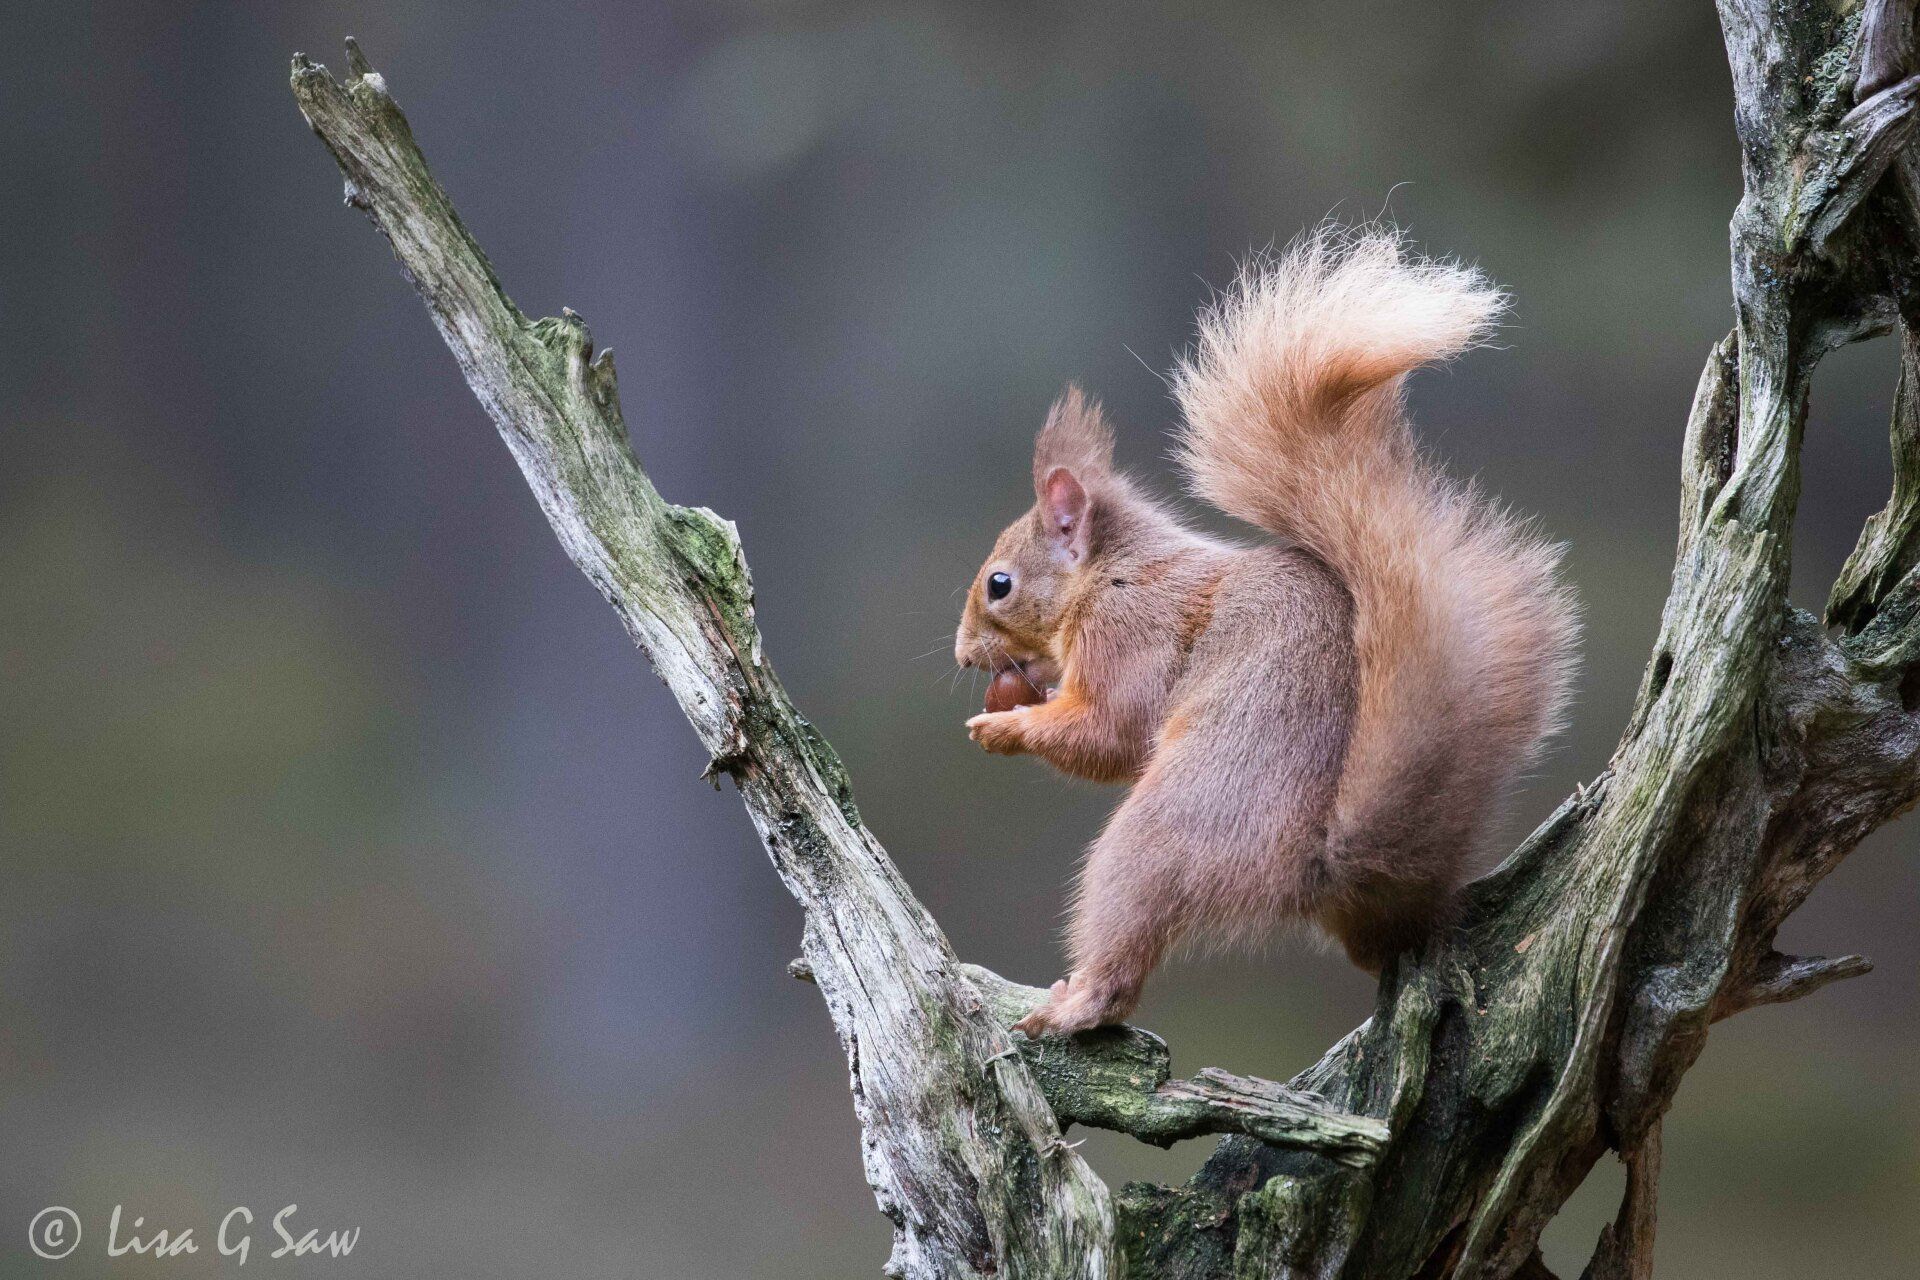 Red Squirrel standing on a branch eating nut